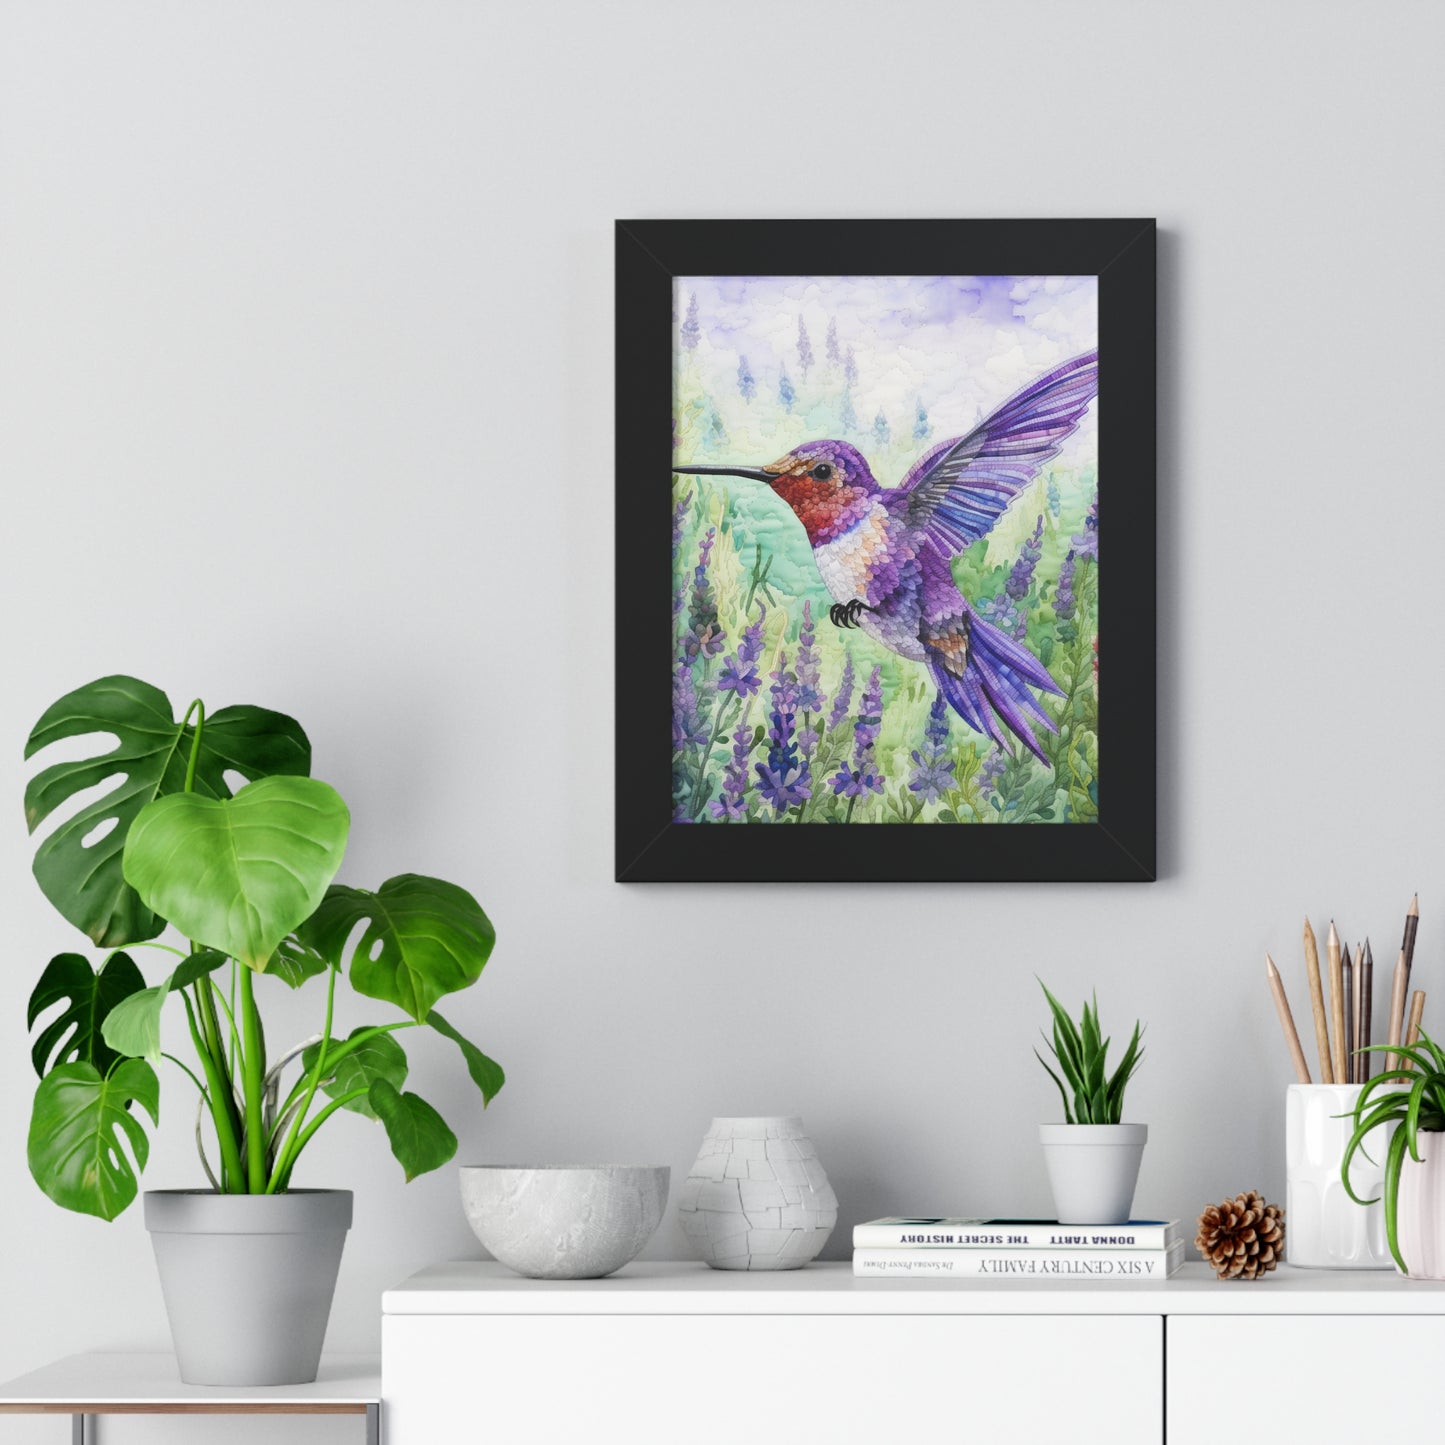 Threaded Wings: A humming's birds dance in a lavender field (Series 4)